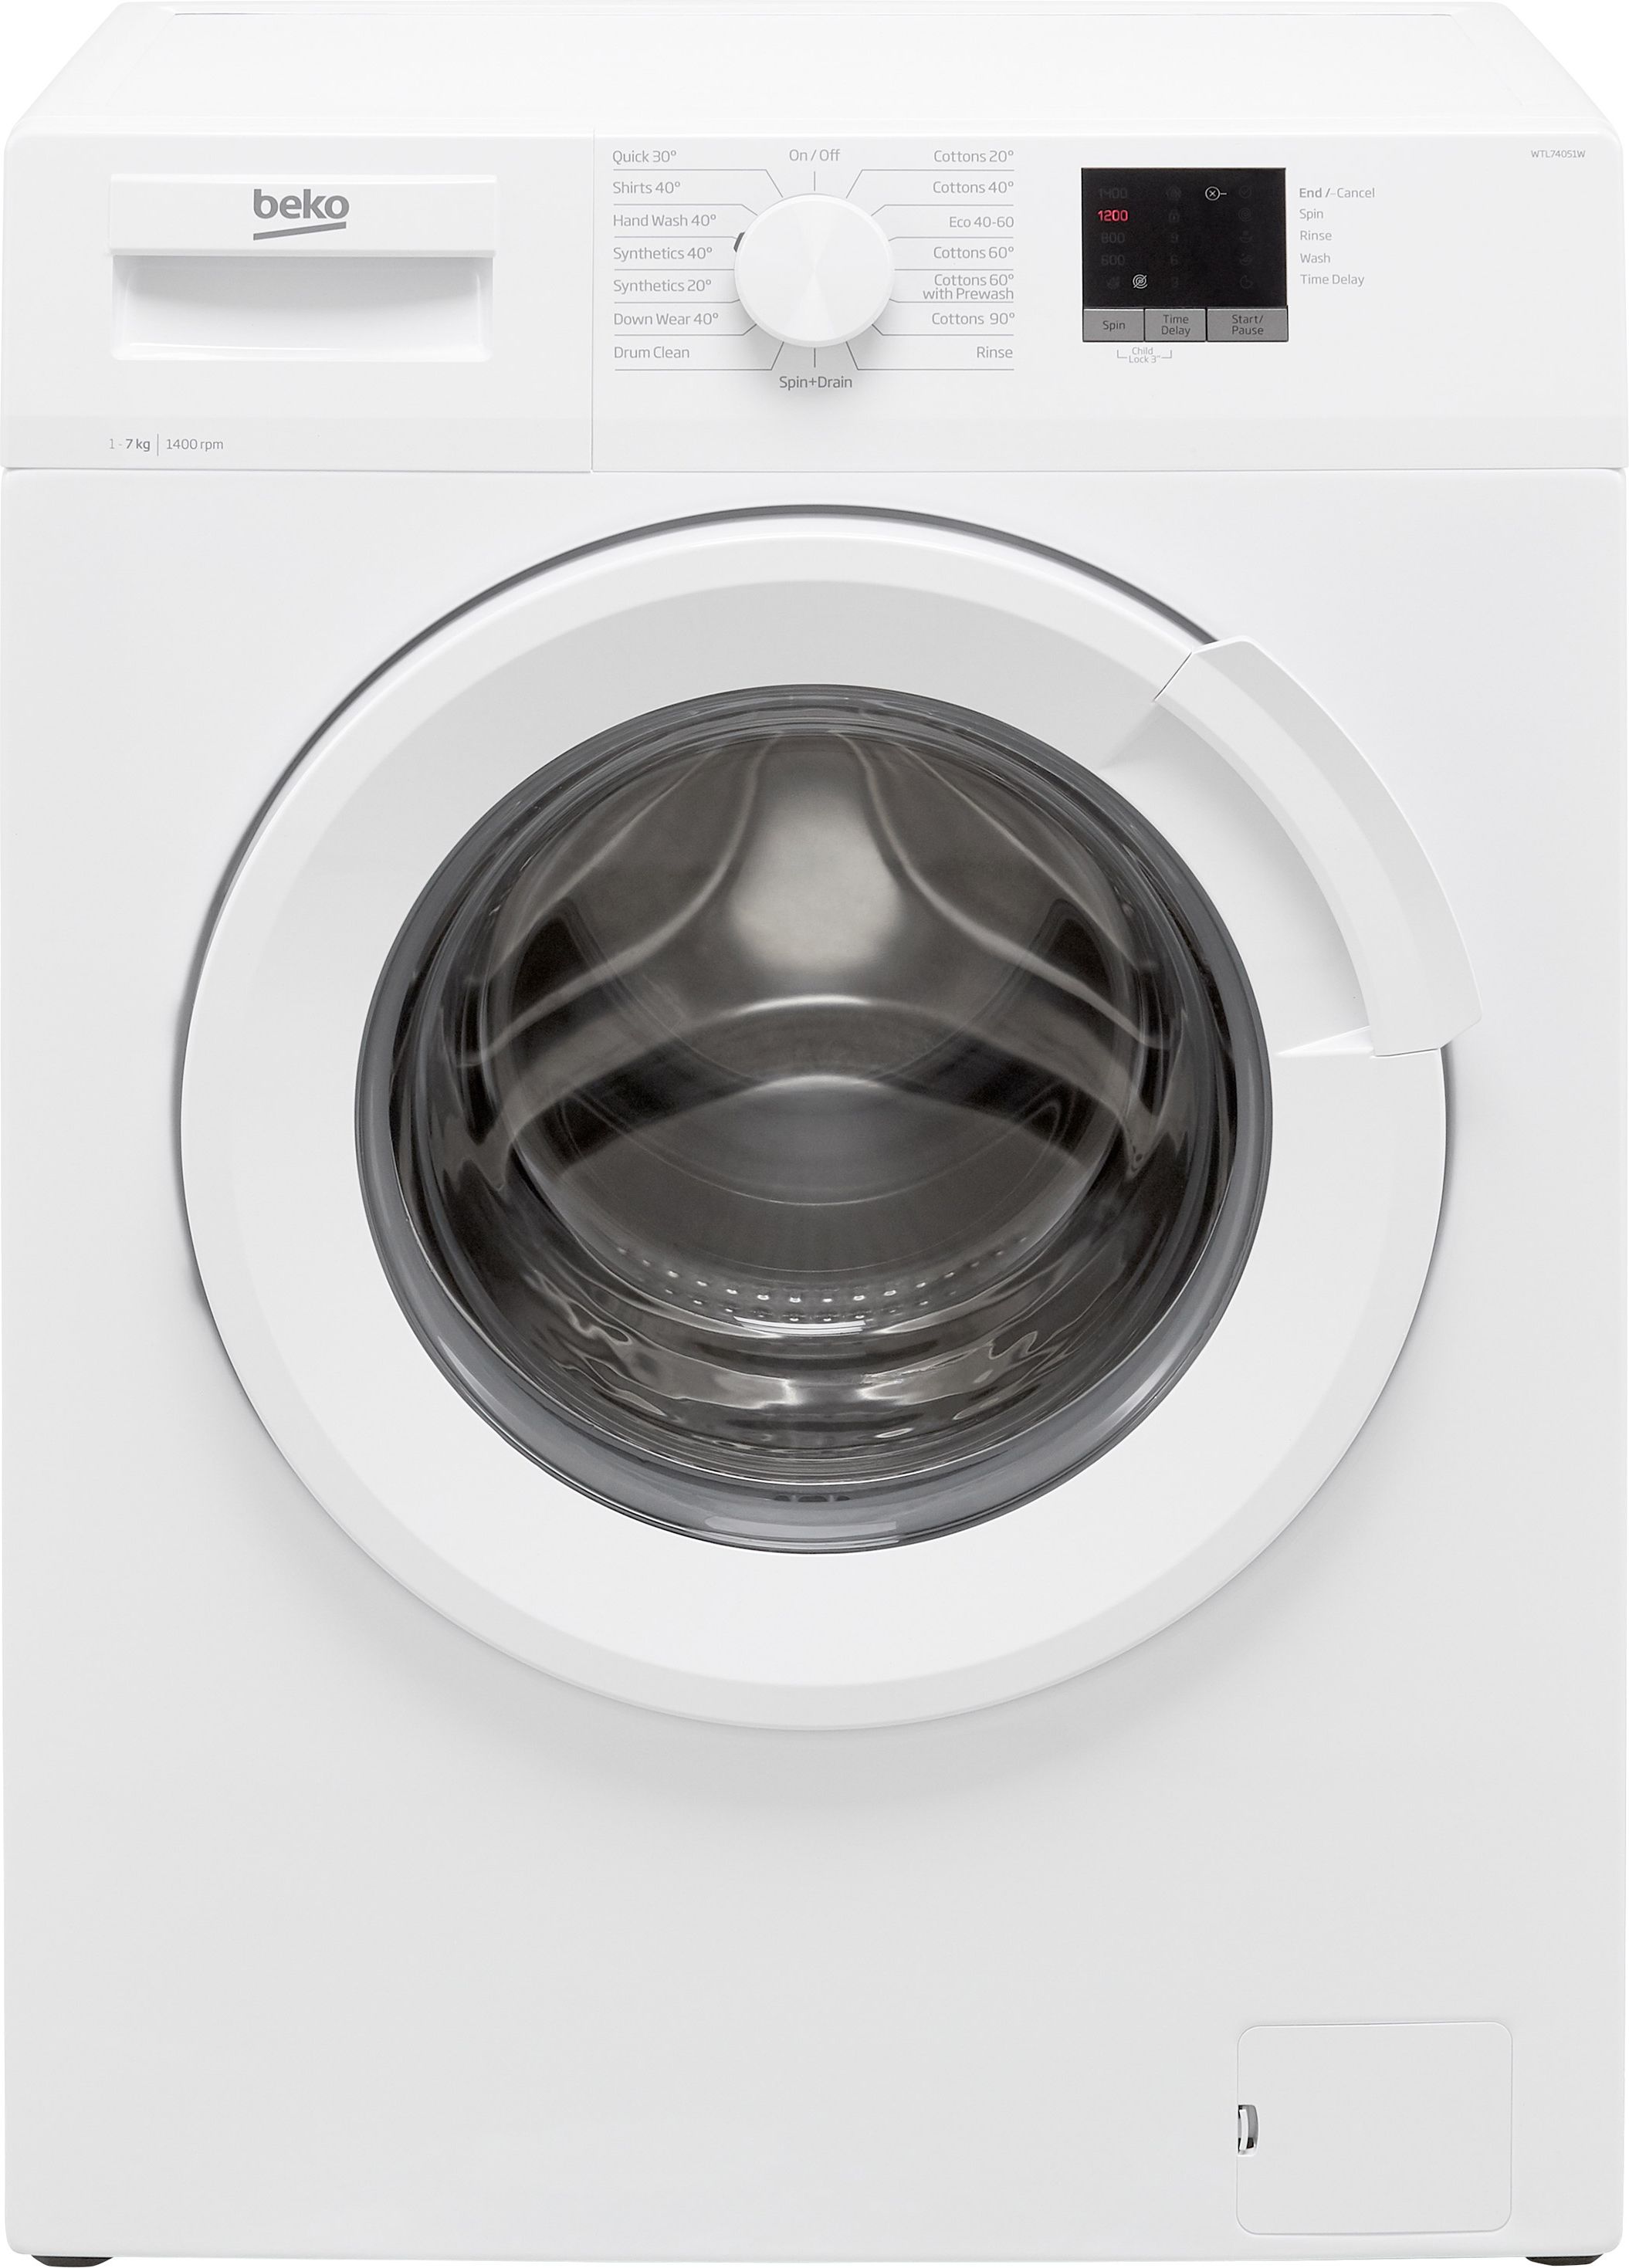 Beko WTL74051W 7kg Washing Machine with 1400 rpm - White - D Rated, White